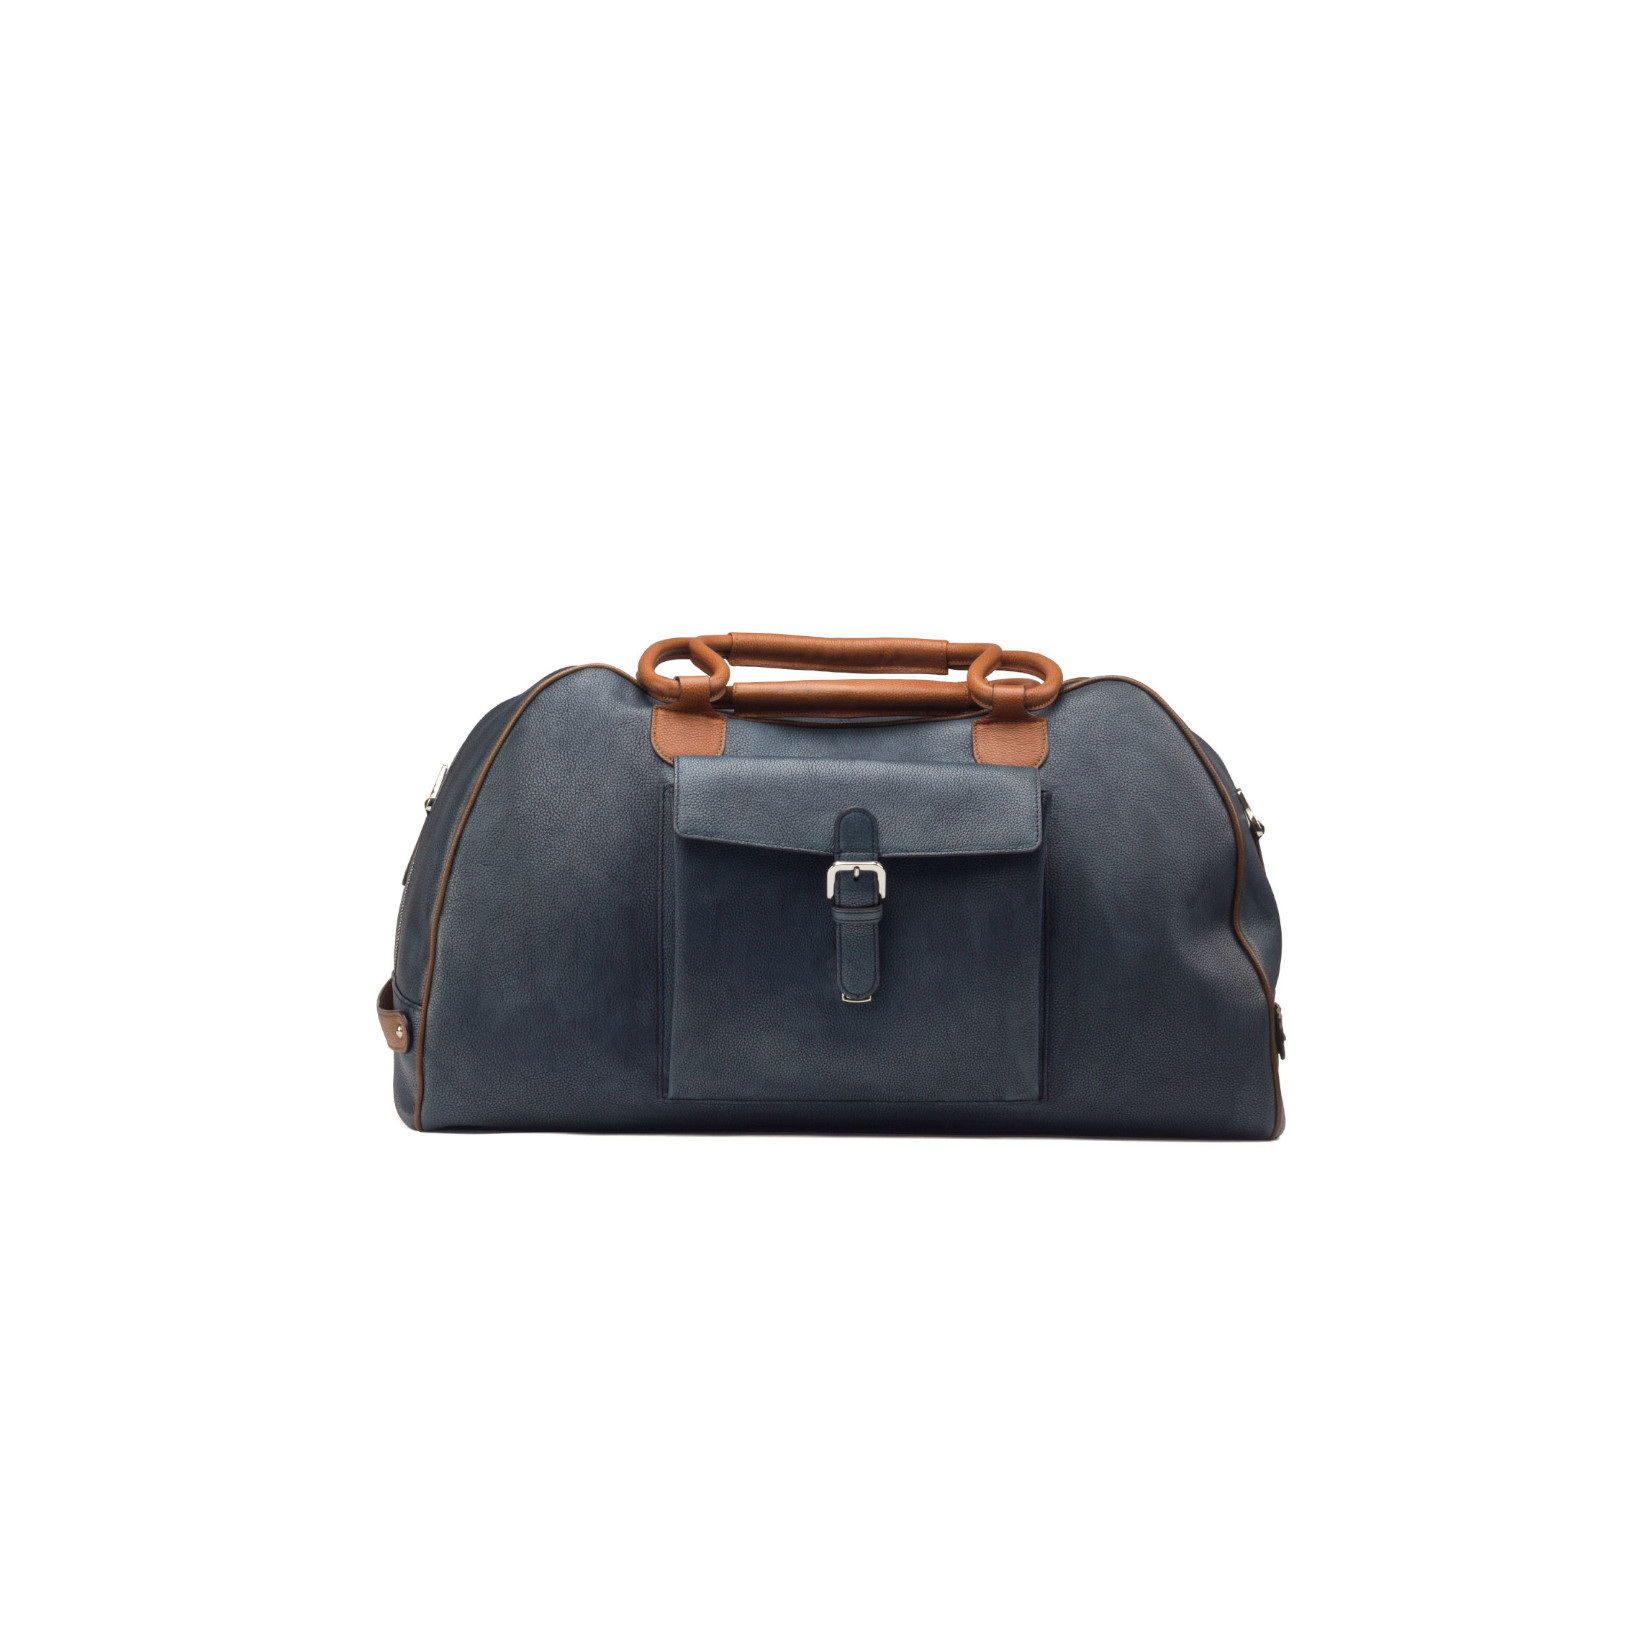 The Weekender Blue leather travel duffel